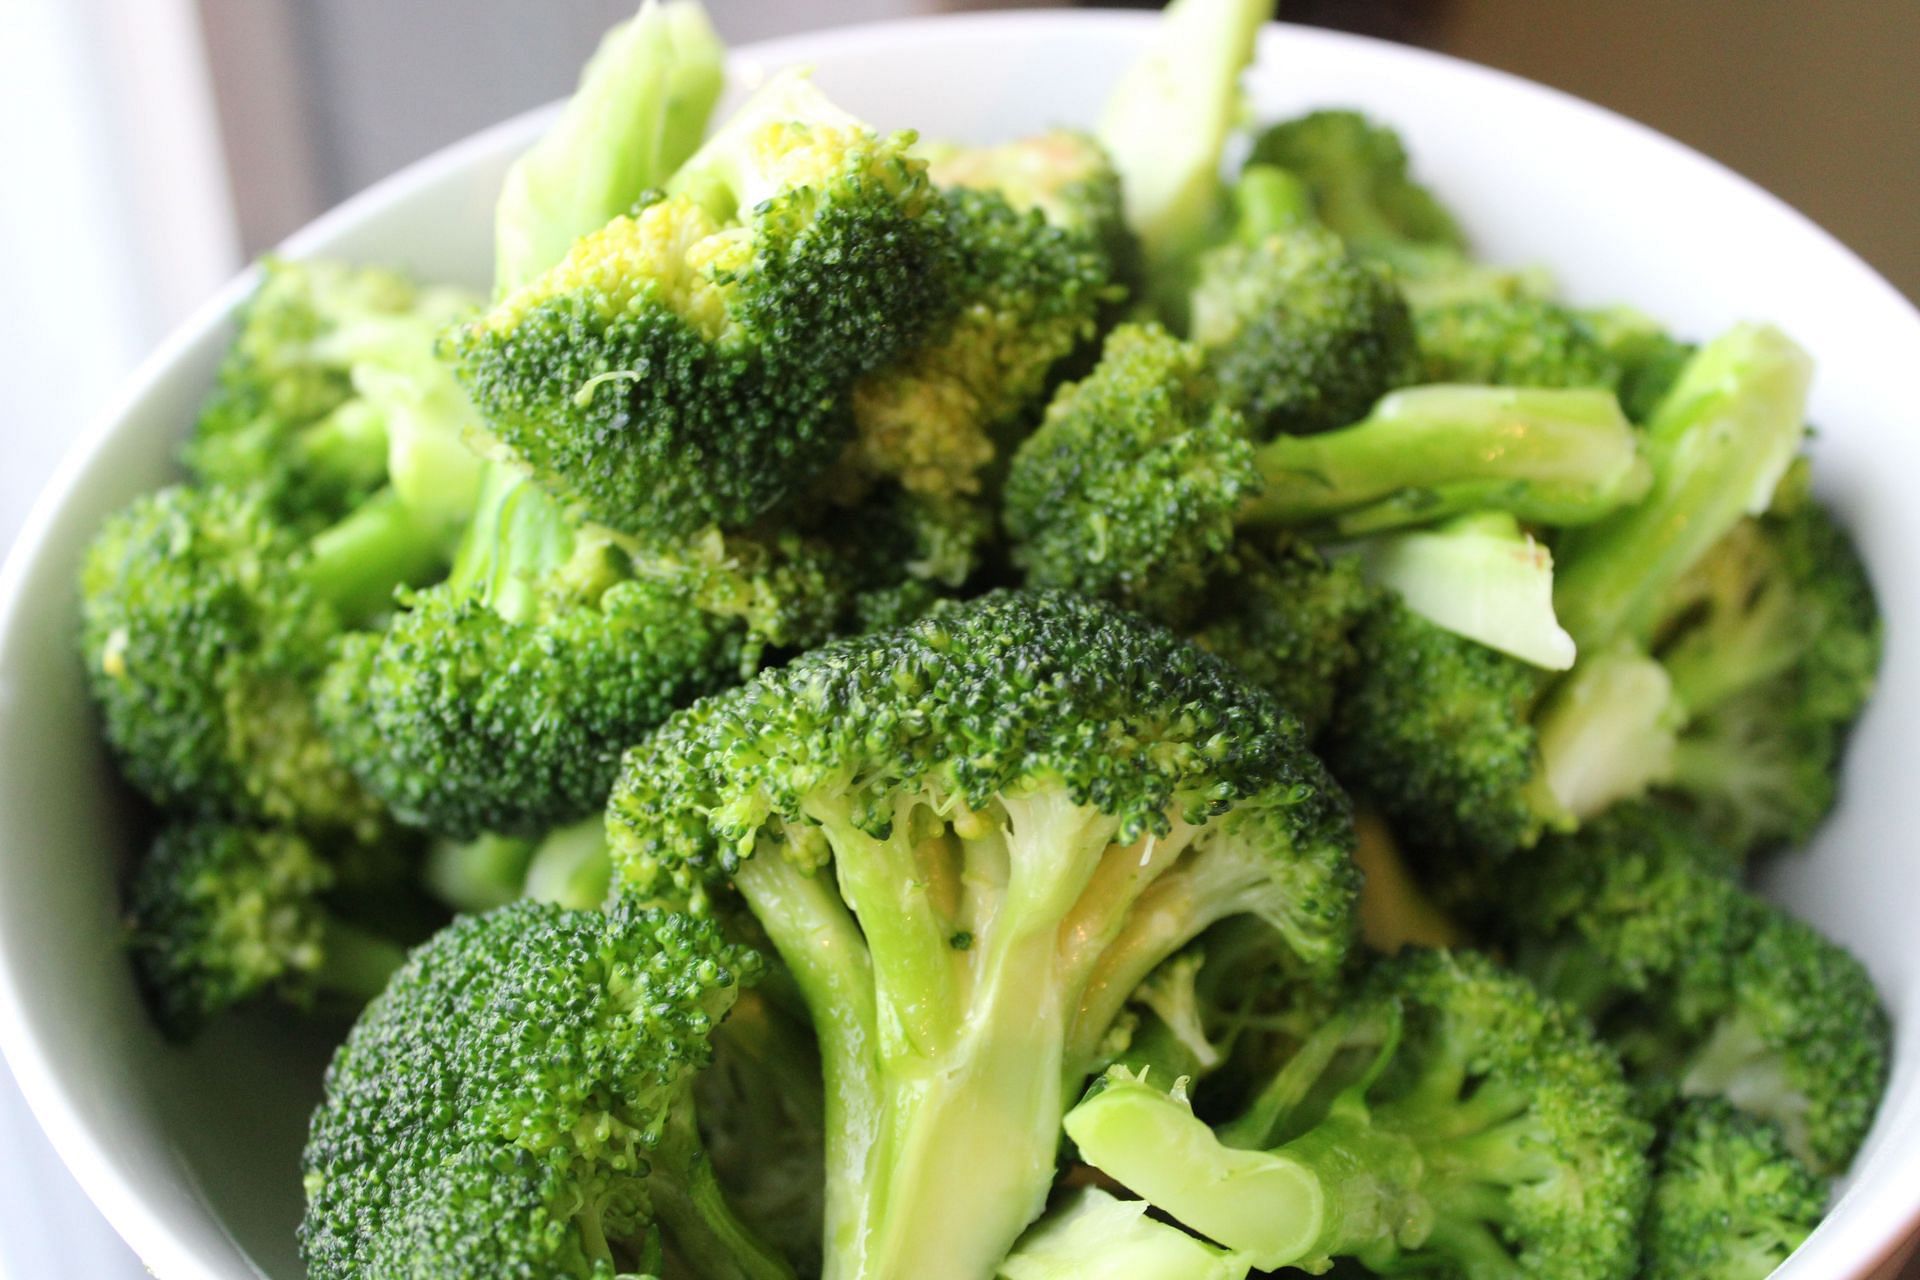 Broccoli is a popular vegetable. (Image via Unsplash/Tyrell Fitness and Nutrition)